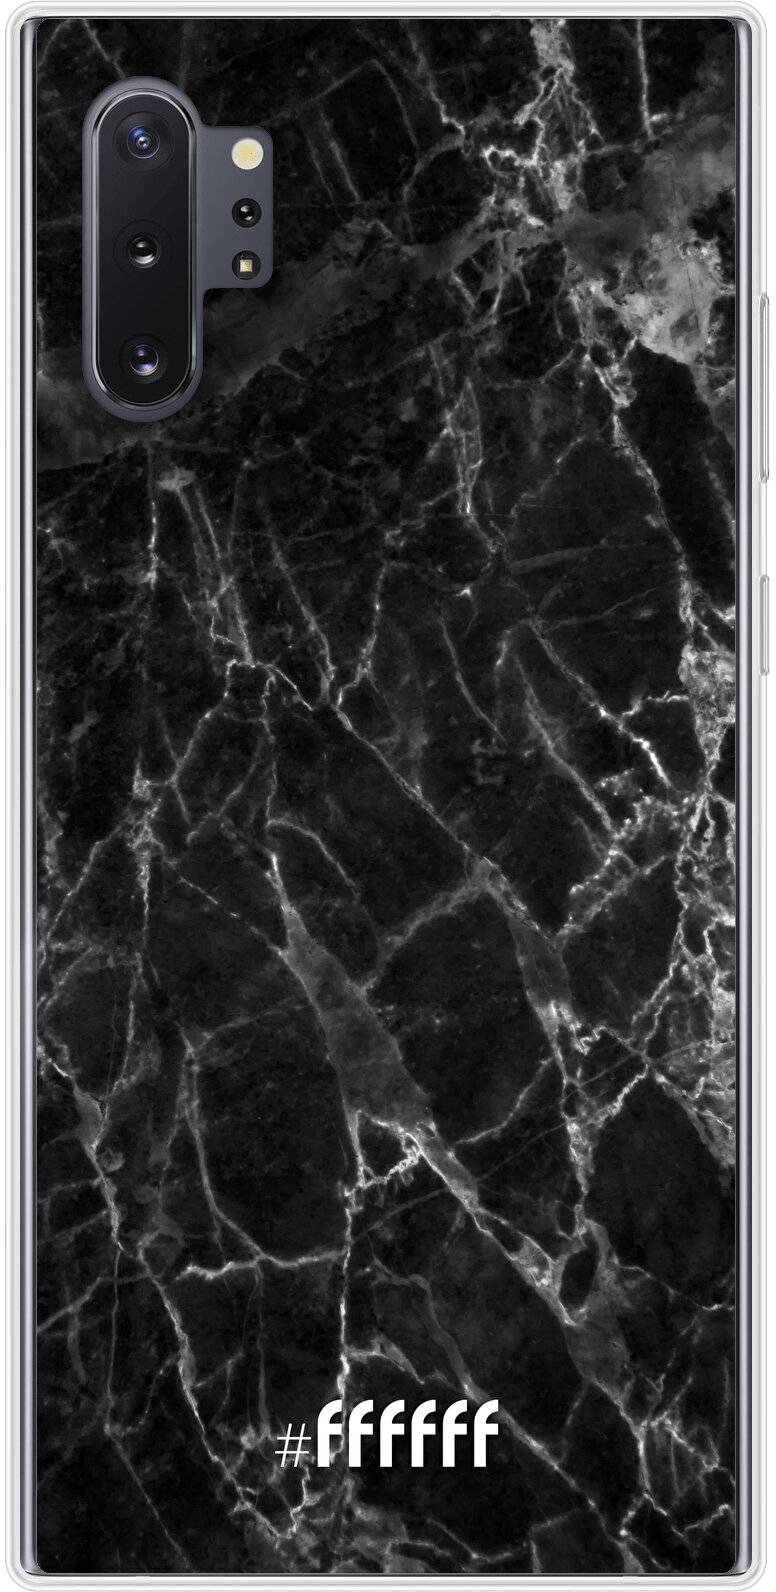 Shattered Marble Galaxy Note 10 Plus